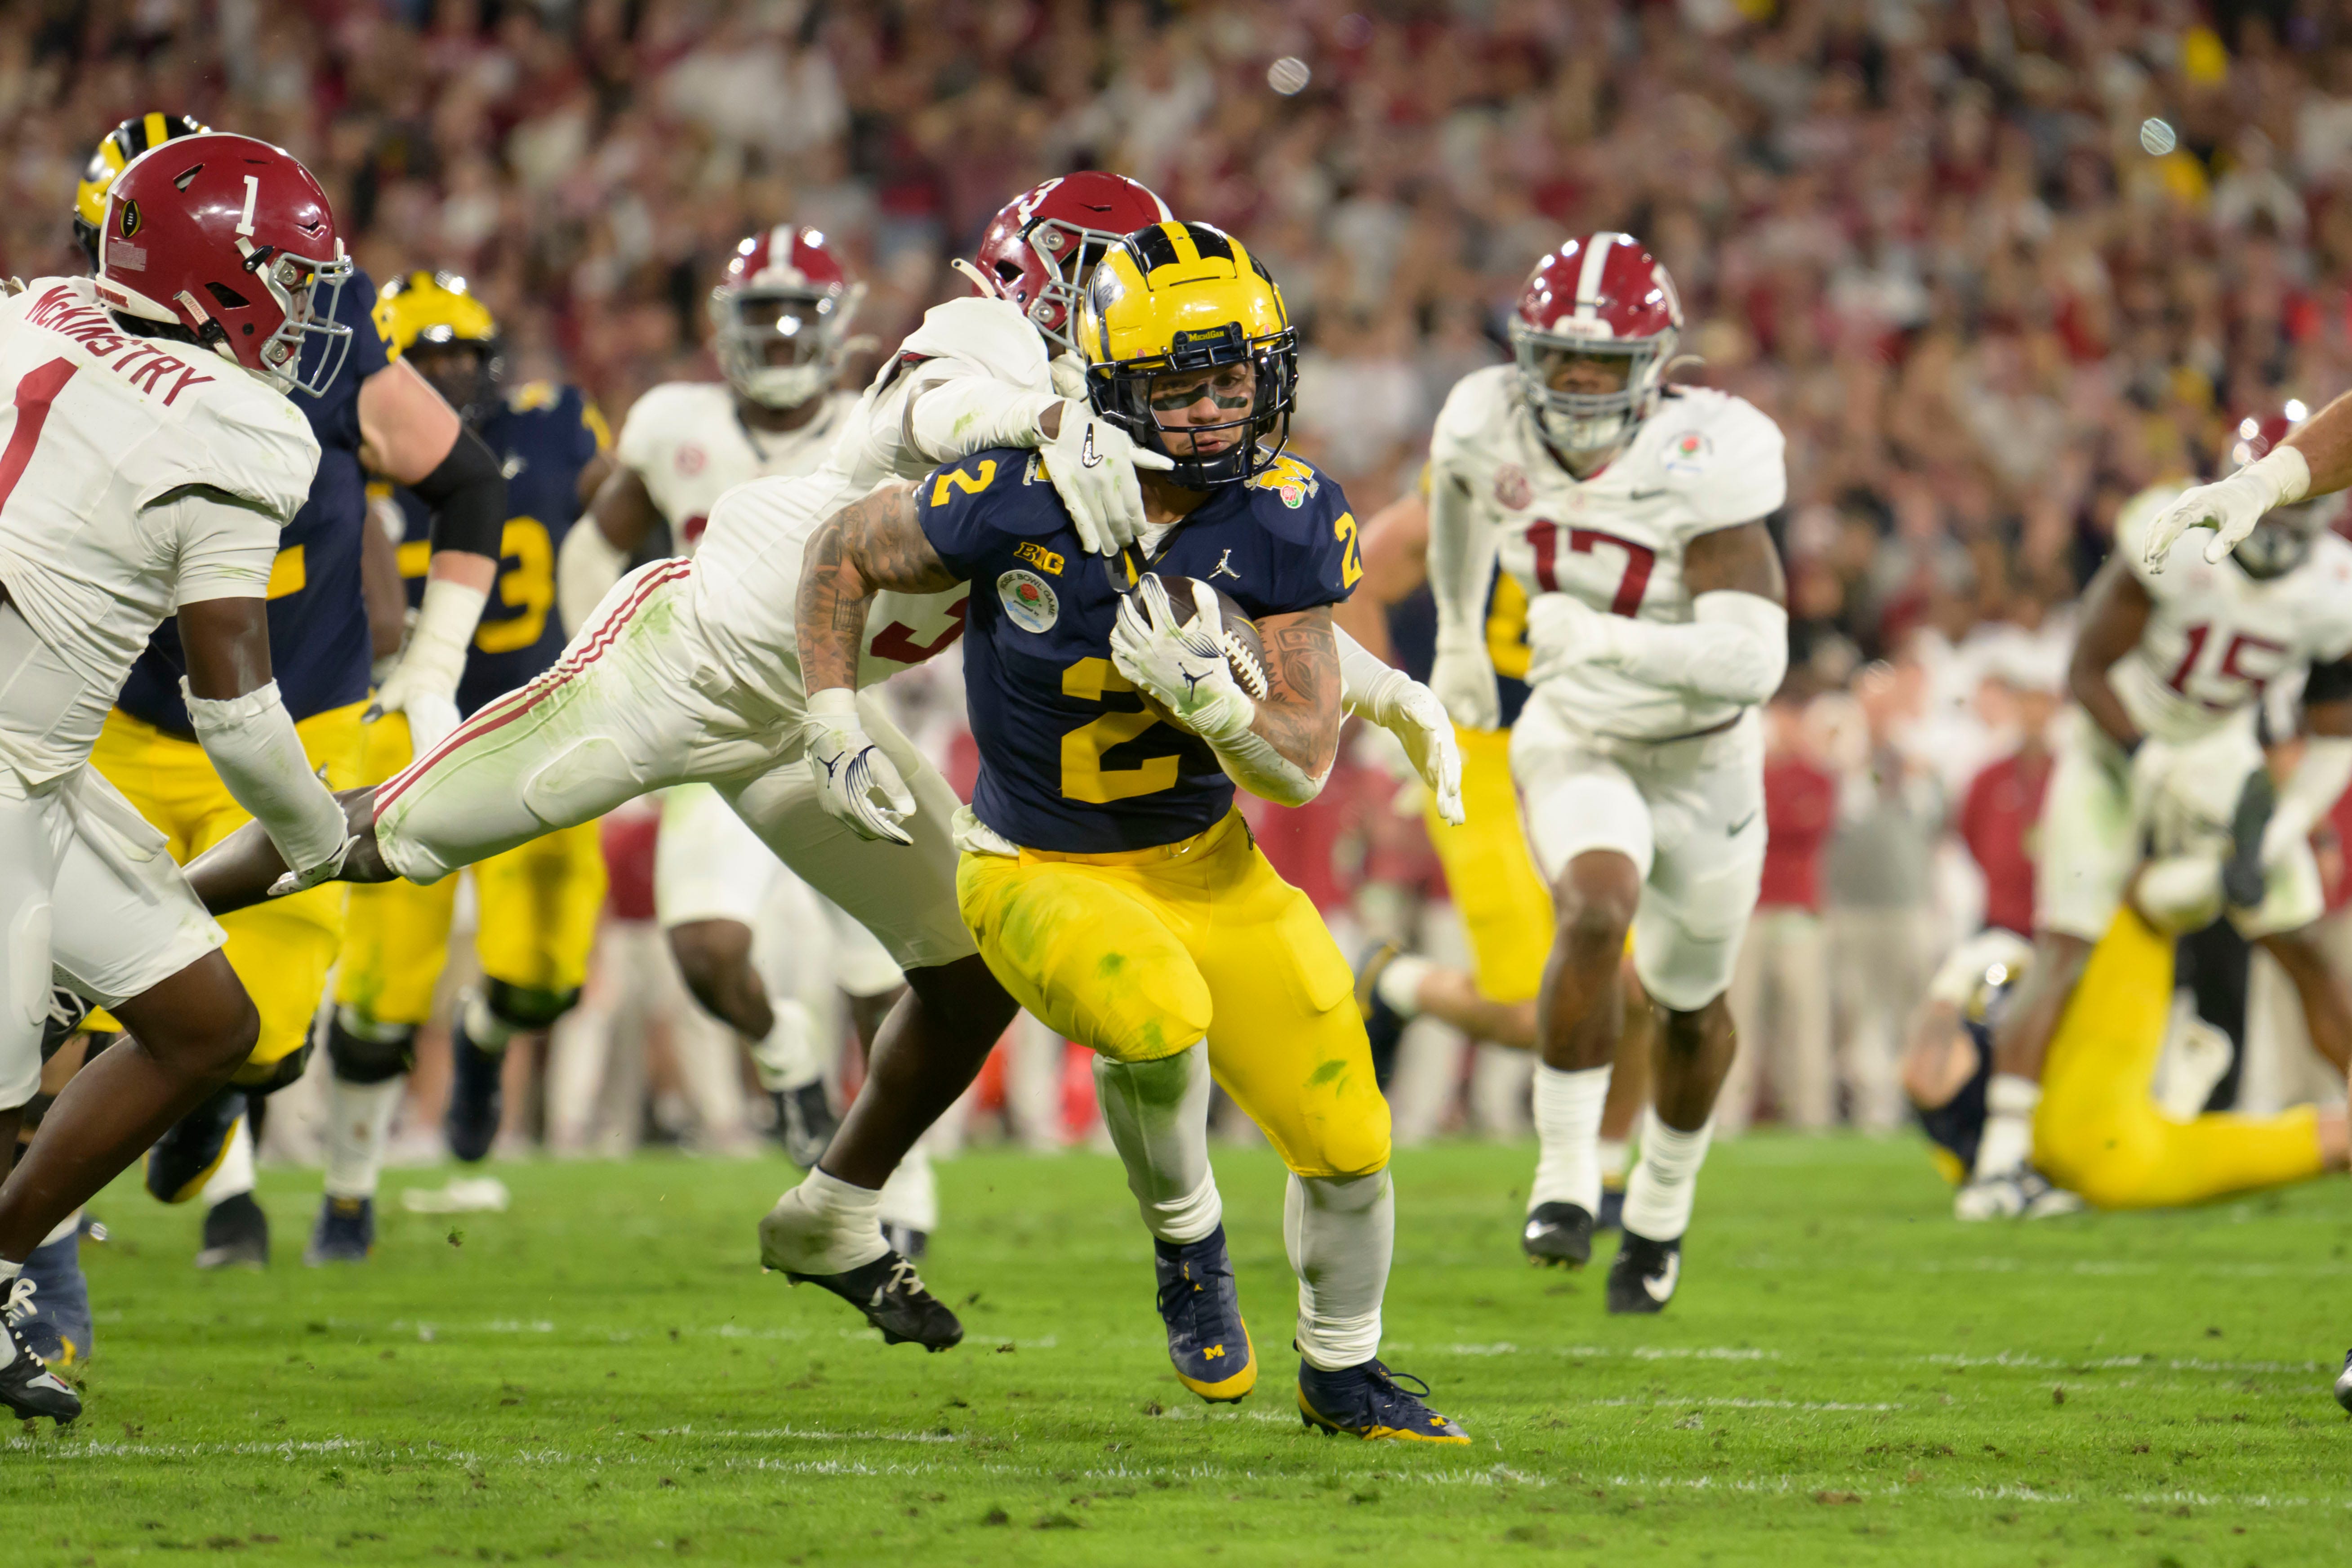 Michigan running back Blake Corum races for the end zone to score a touchdown during the overtime period of the Rose Bowl, in Pasadena, California, January 1, 2024.